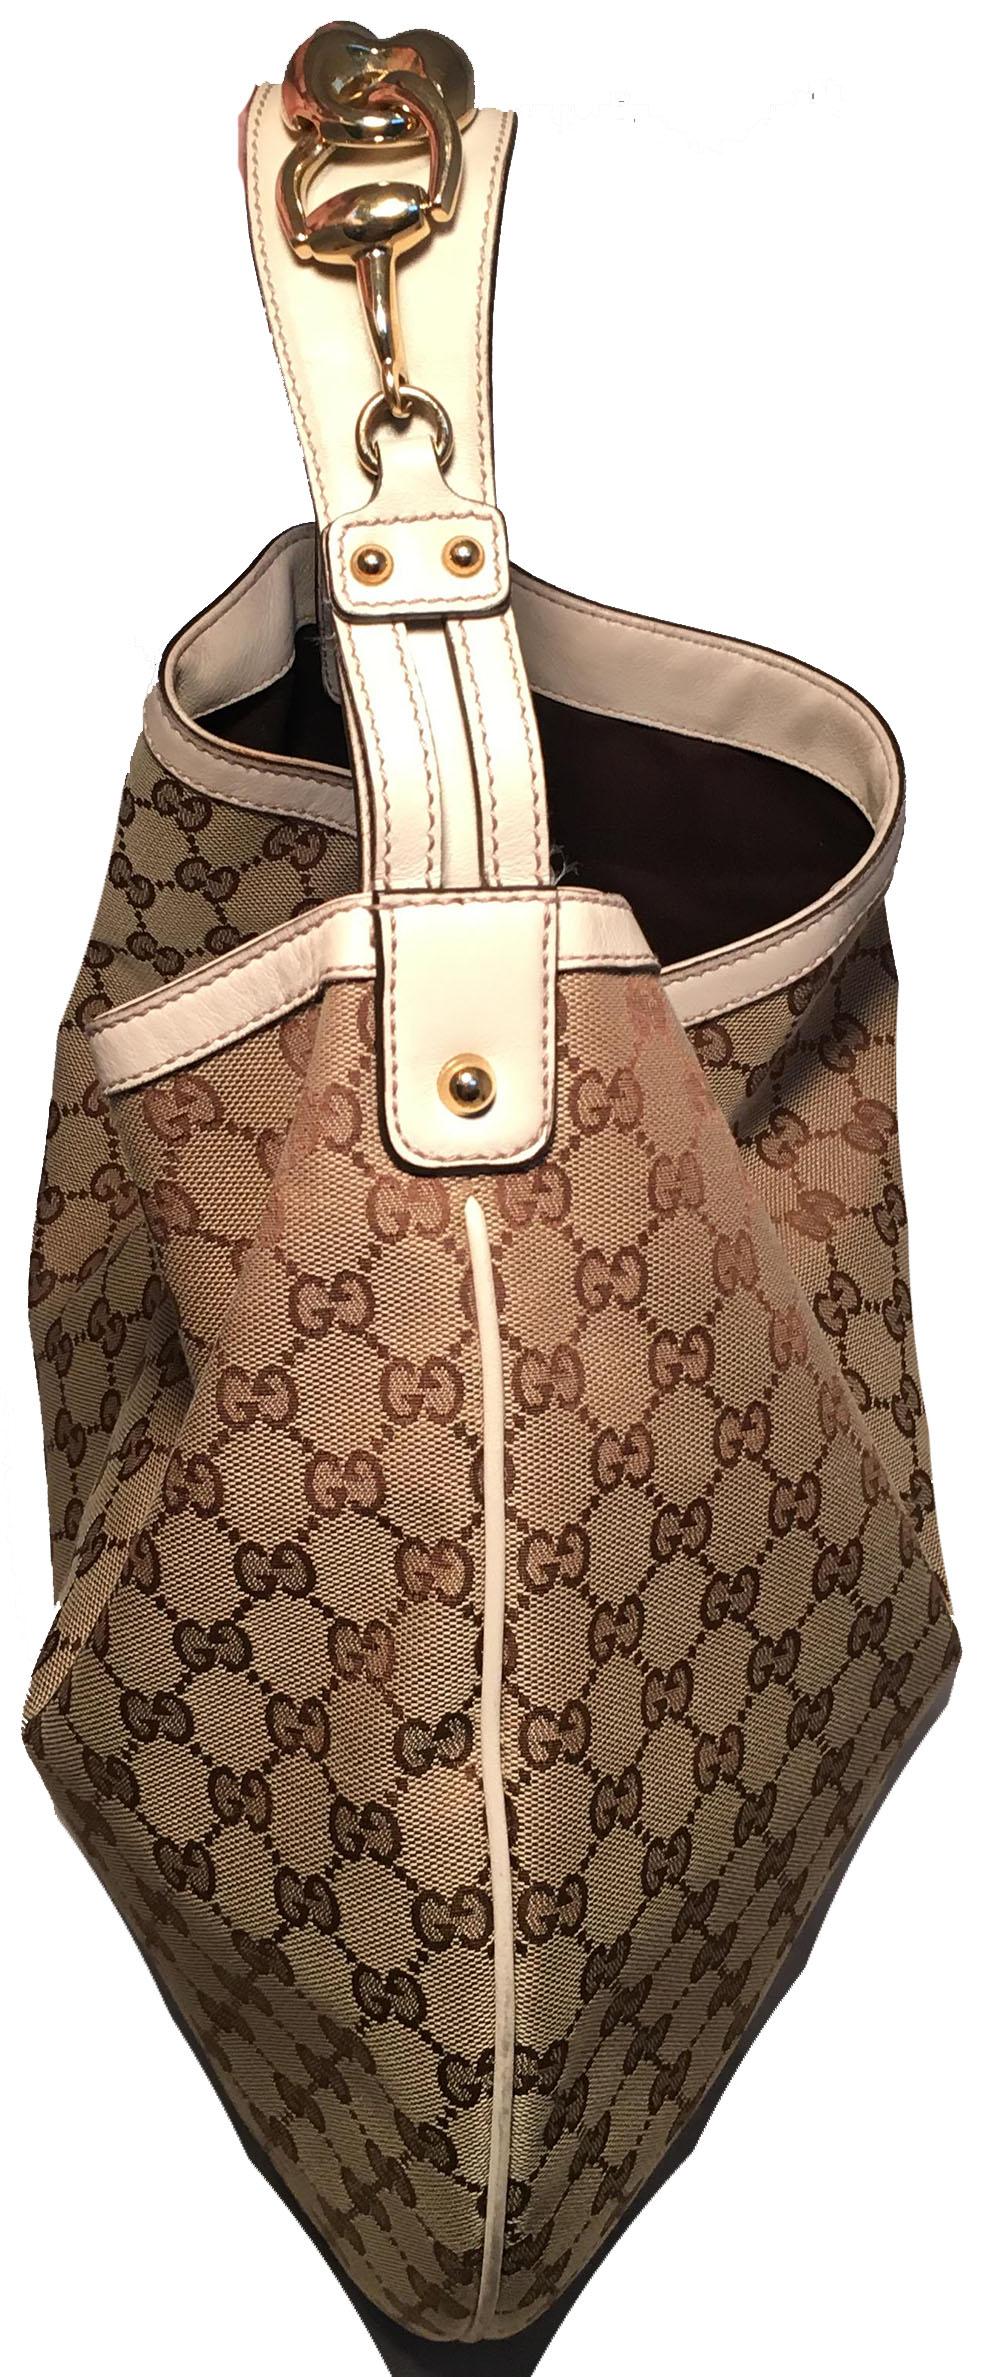 CLASSIC Gucci GG Monogram Canvas and Beige Leather Hobo Shoulder Bag in excellent condition. Monogram GG canvas exterior trimmed with beige leather and gold hardware. Deep interior pocket is lined with brown nylon and holds one zipped and one slit